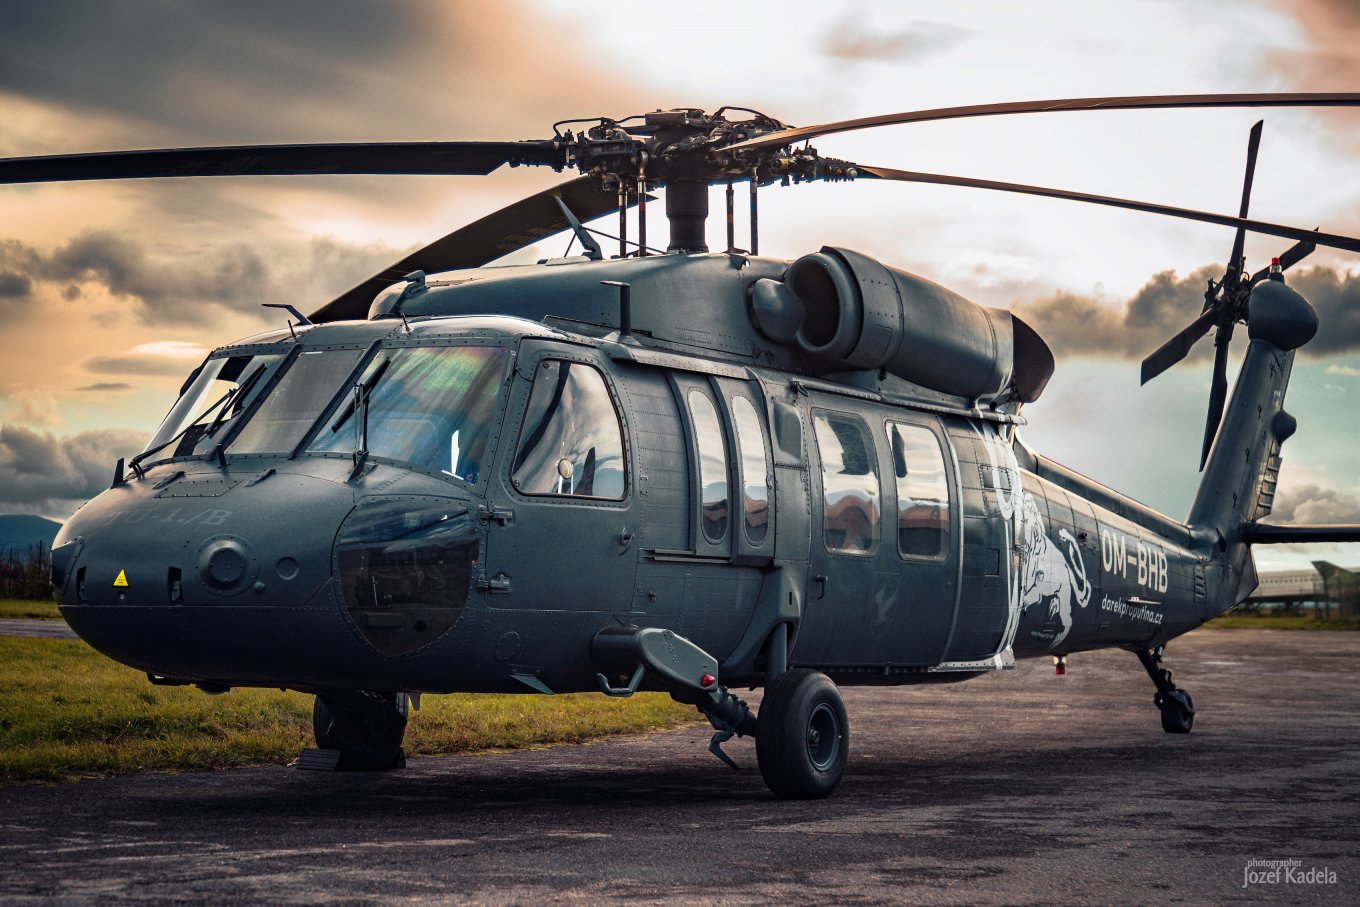 The Black Hawk helicopter Defense Express The Defense Intelligence of Ukraine: Gift for Putin Initiative Raises Funds for Black Hawk Helicopter